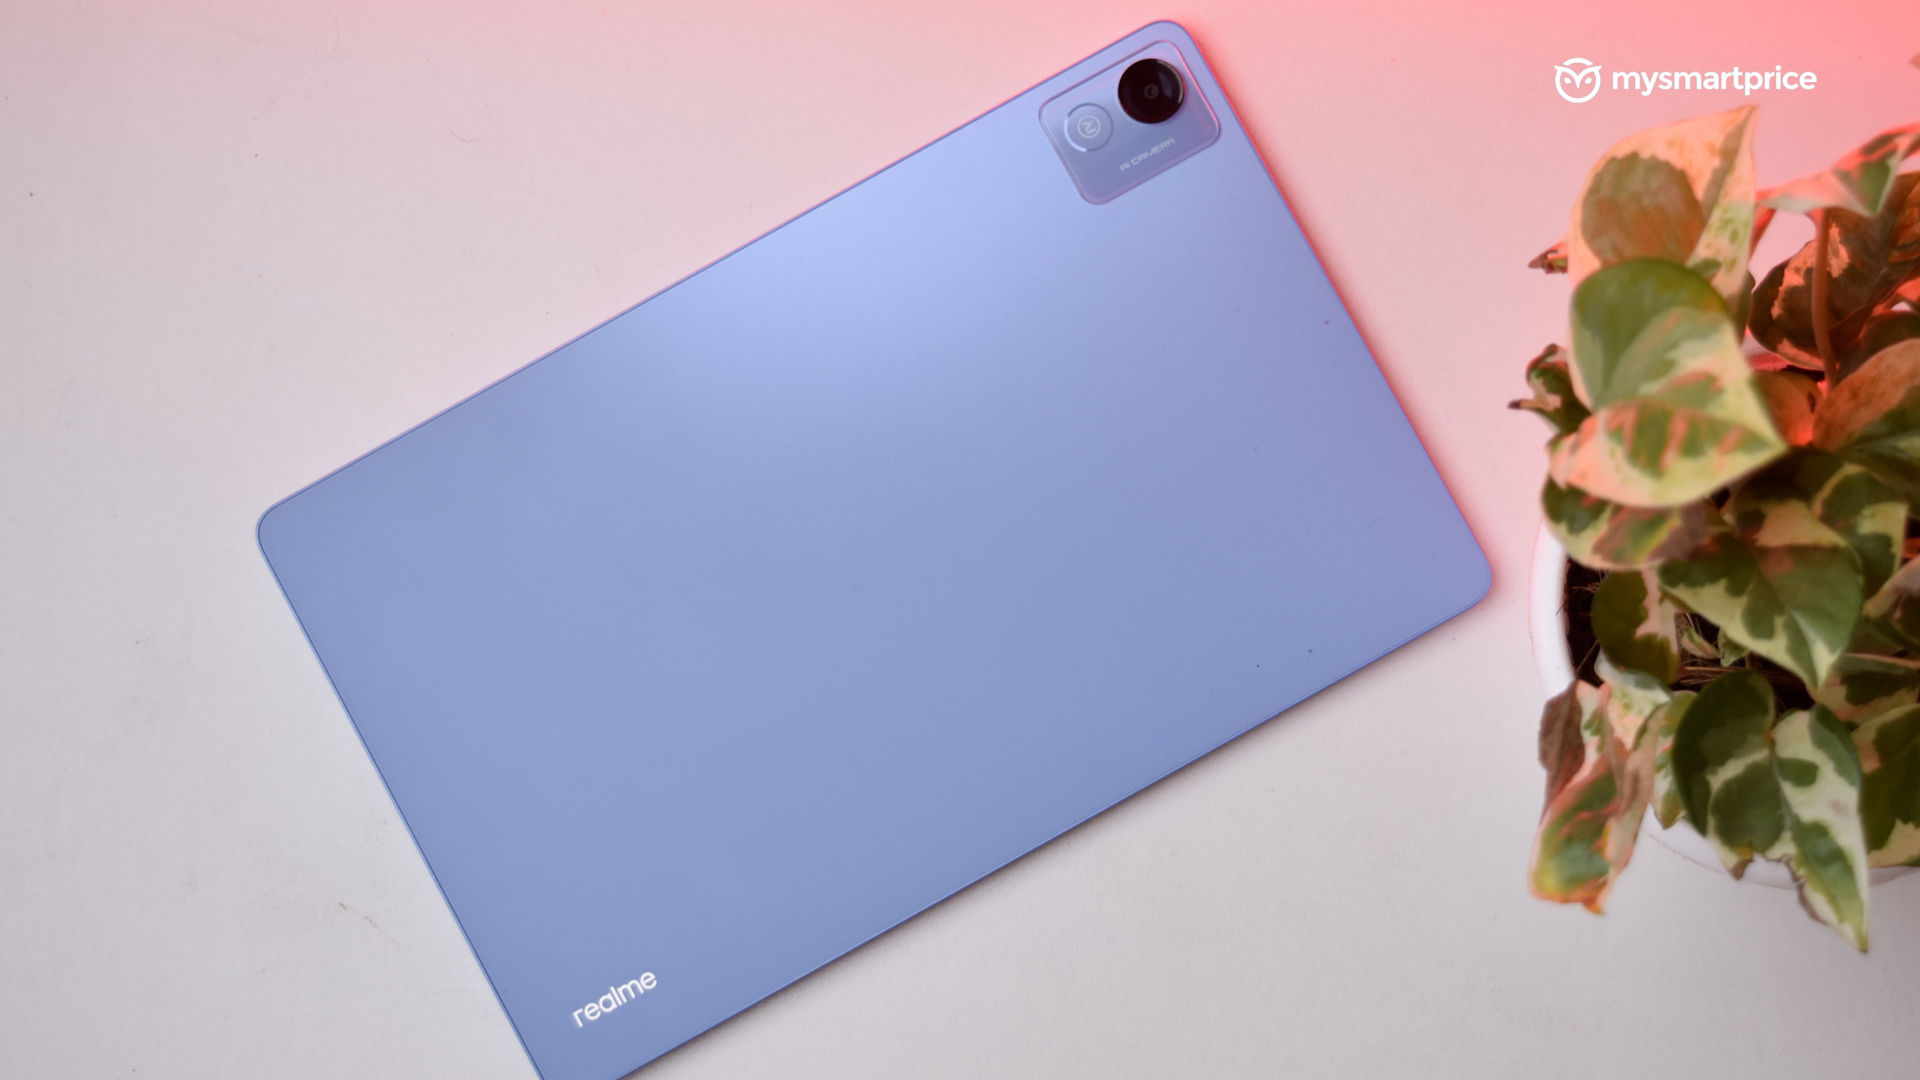 Realme Pad Mini Long-Term Review: A Compact and Lightweight Superstar from  Realme - MySmartPrice